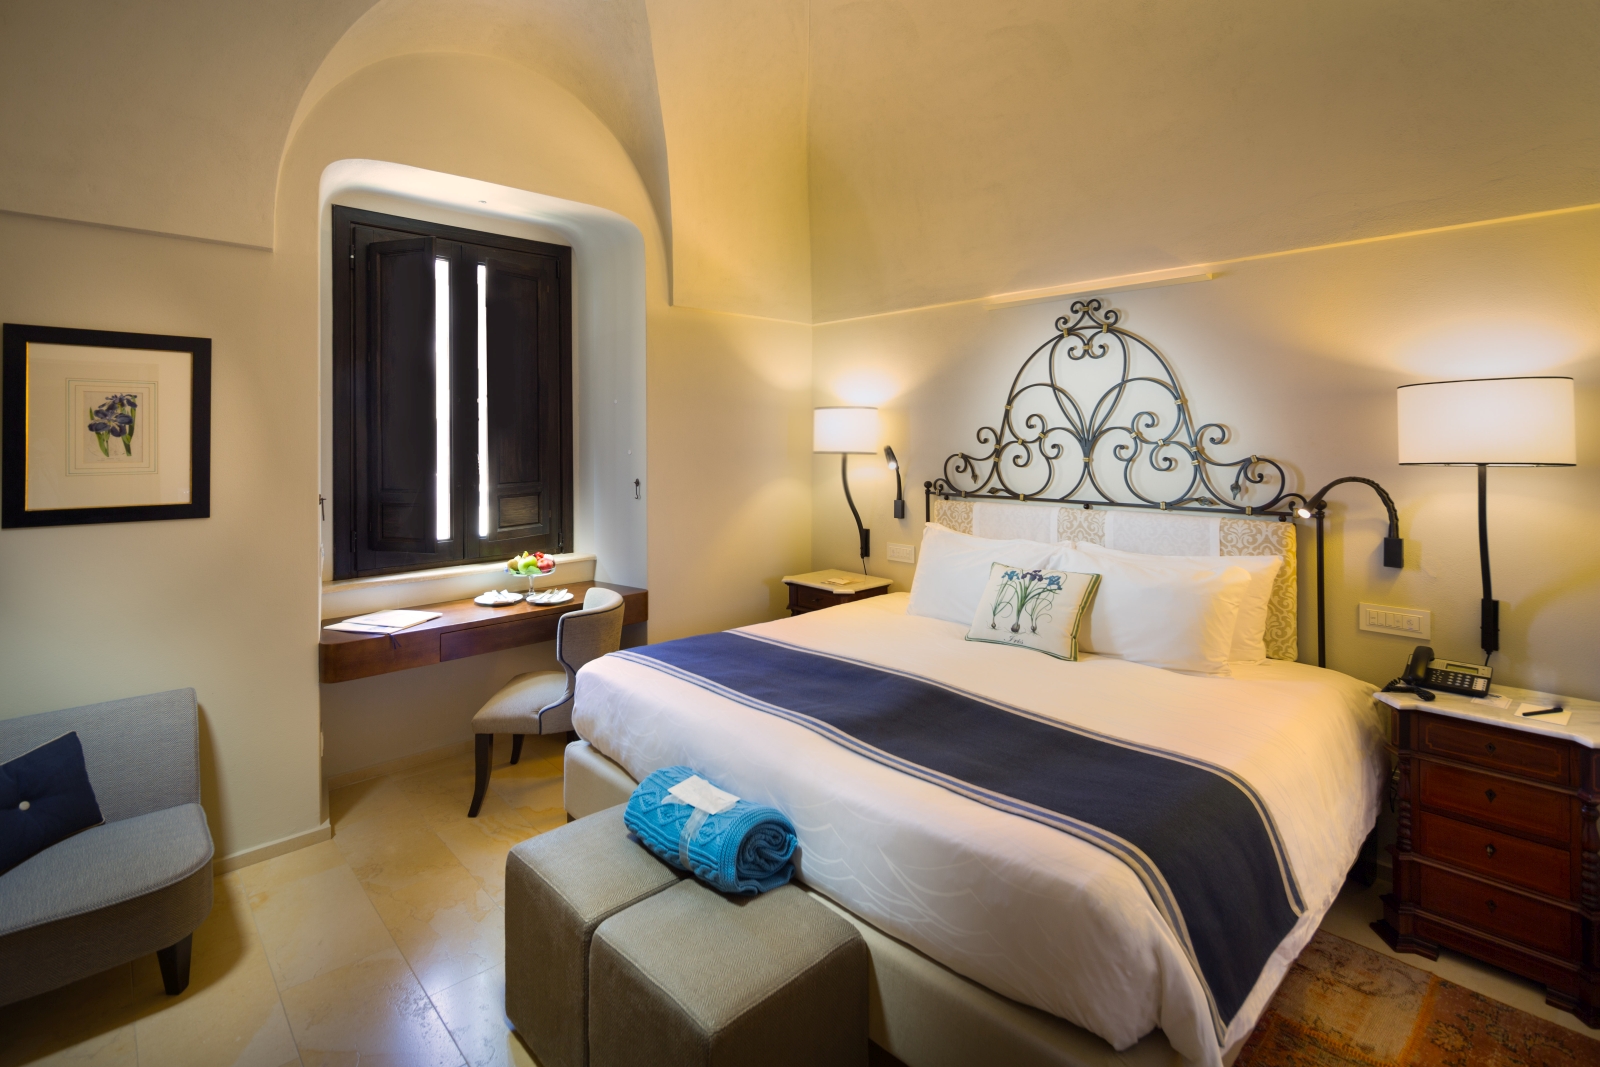 Double room with shutter windows and iron cast head board at Monastera Santa Rosa, luxury hotel in Italy